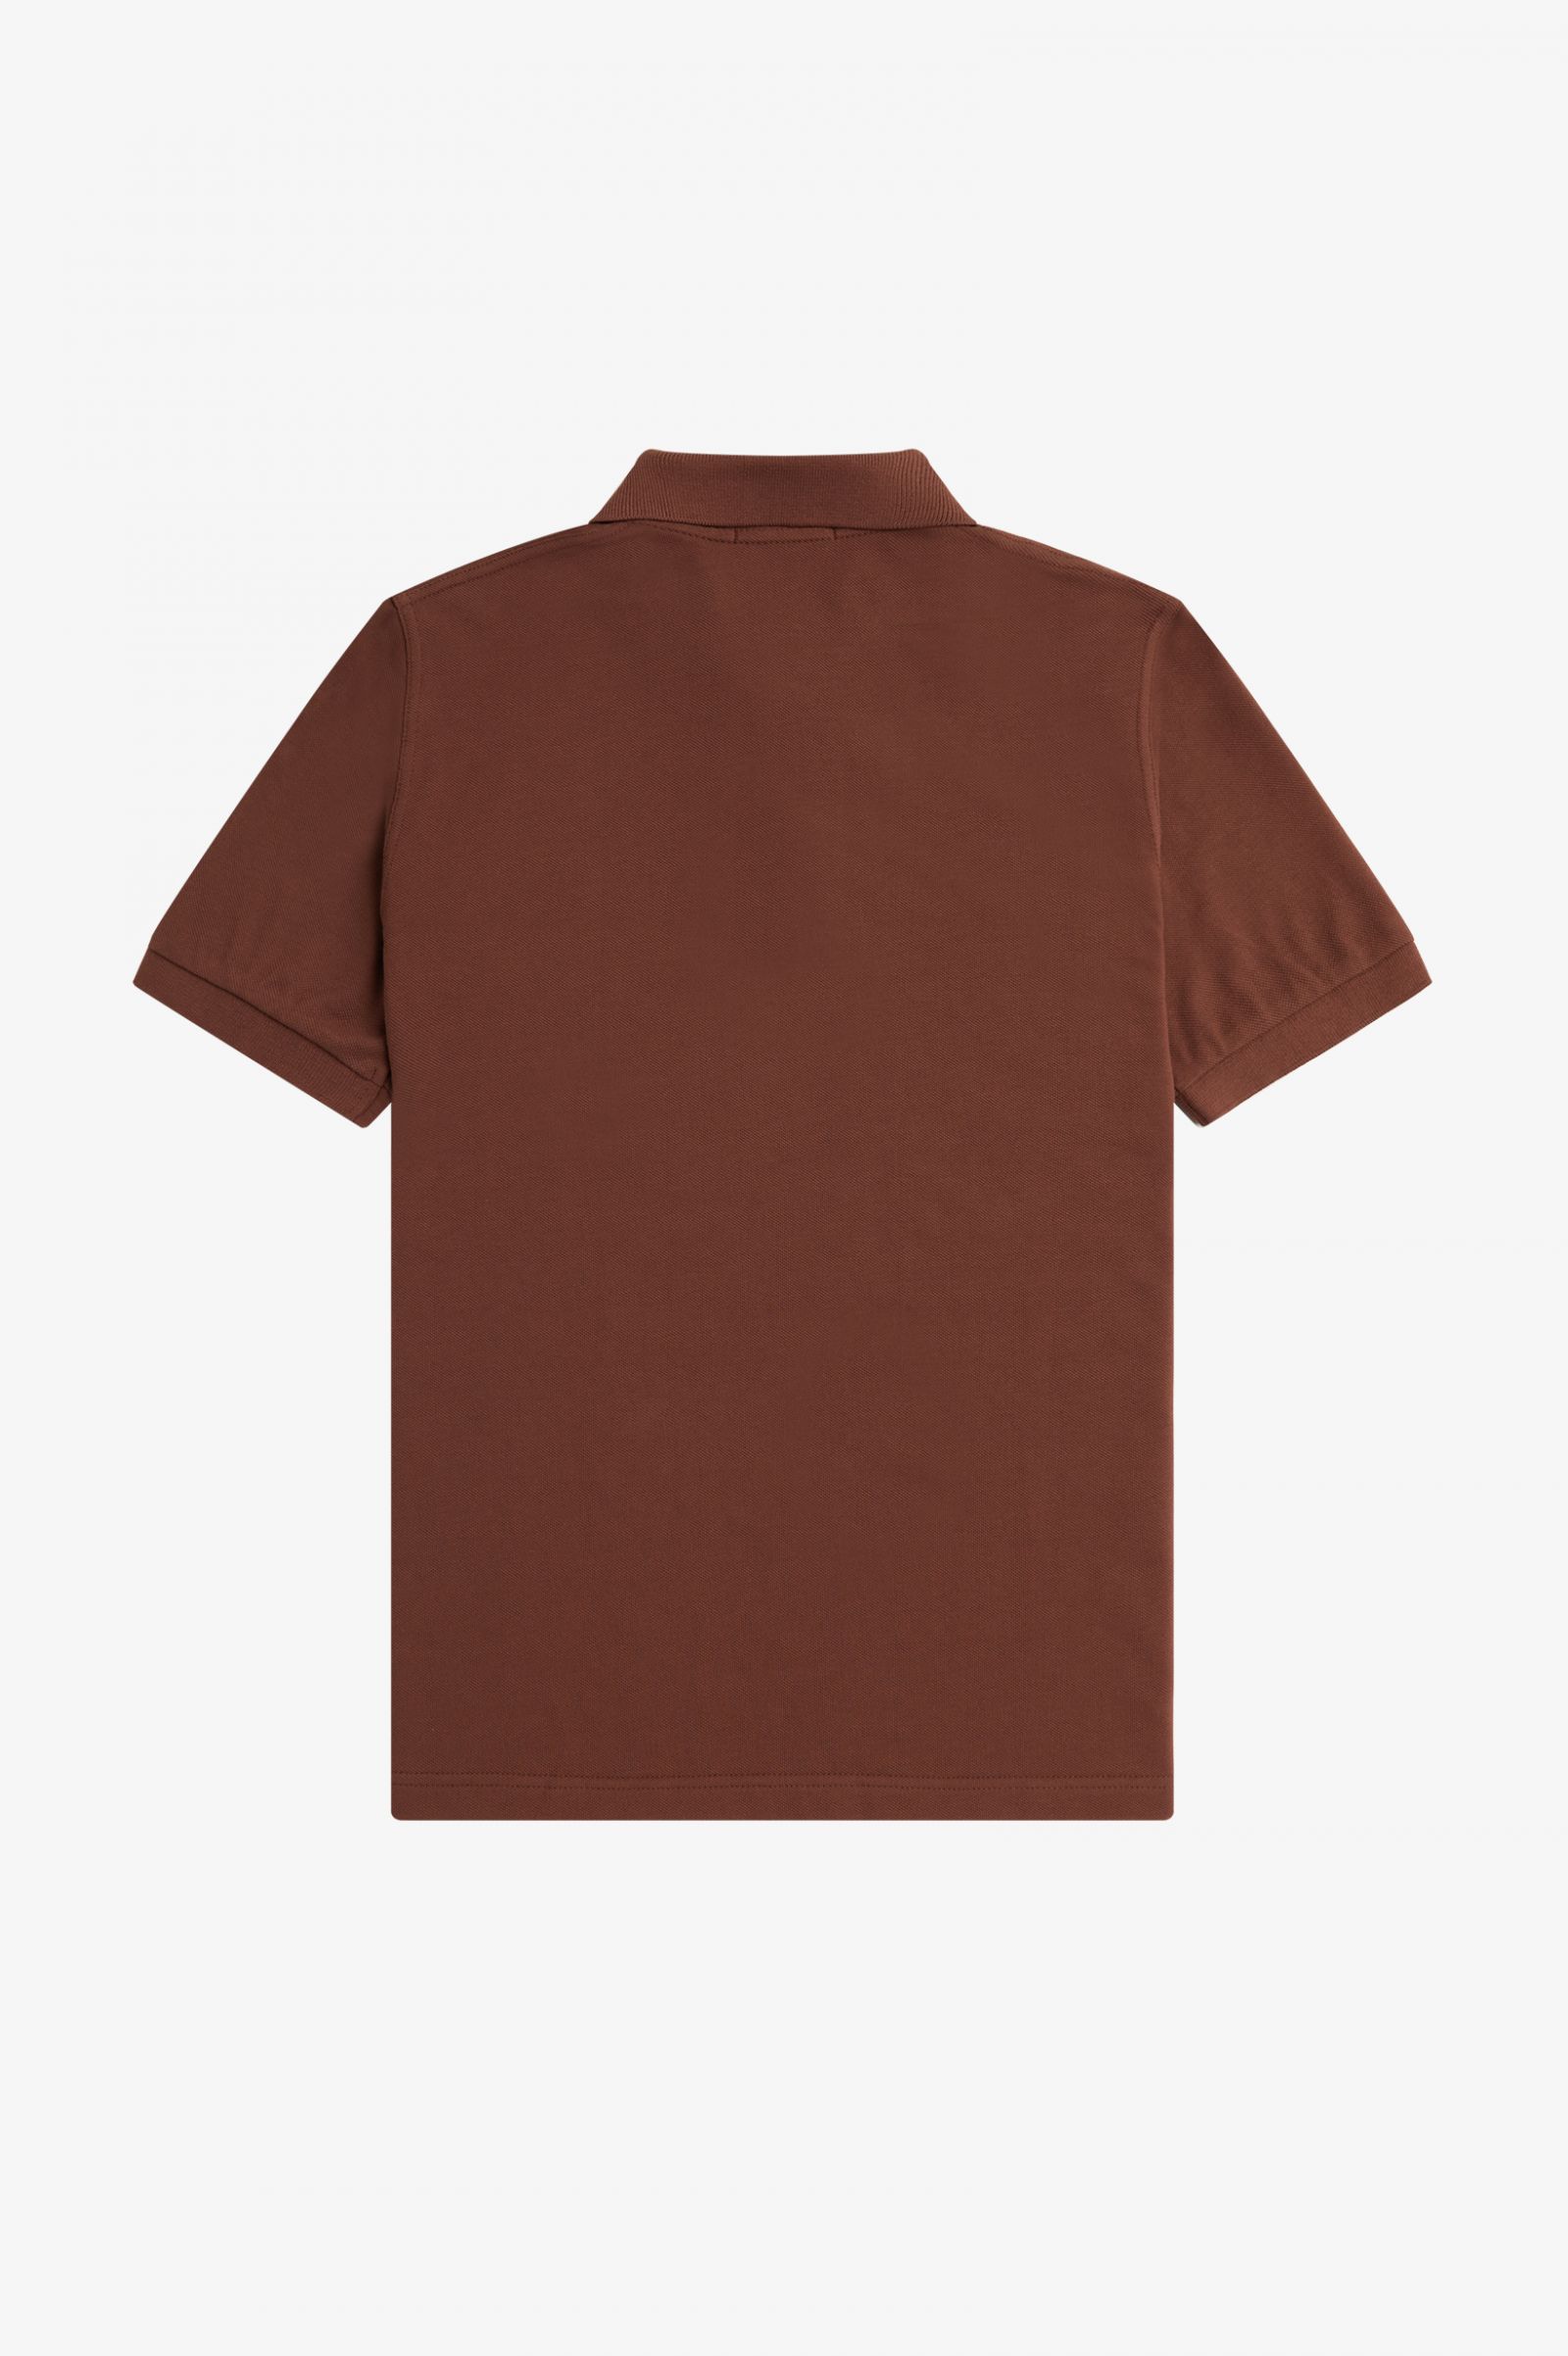 Fred Perry The Original Shirt in Whisky Brown 